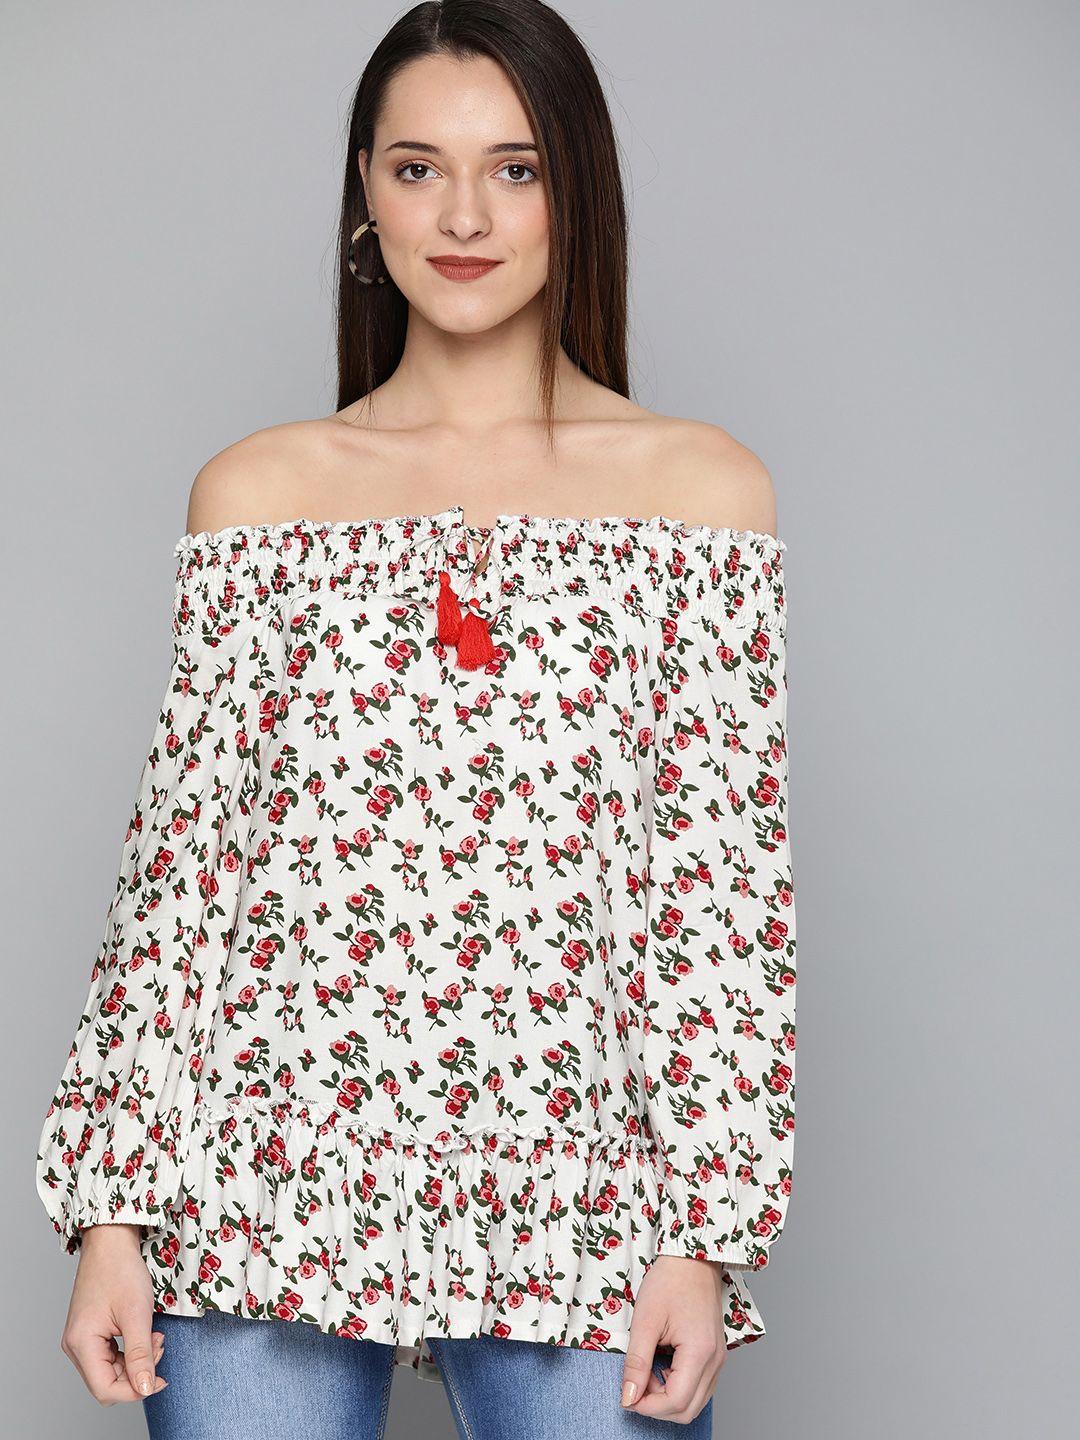 here&now women white & red floral print bardot top